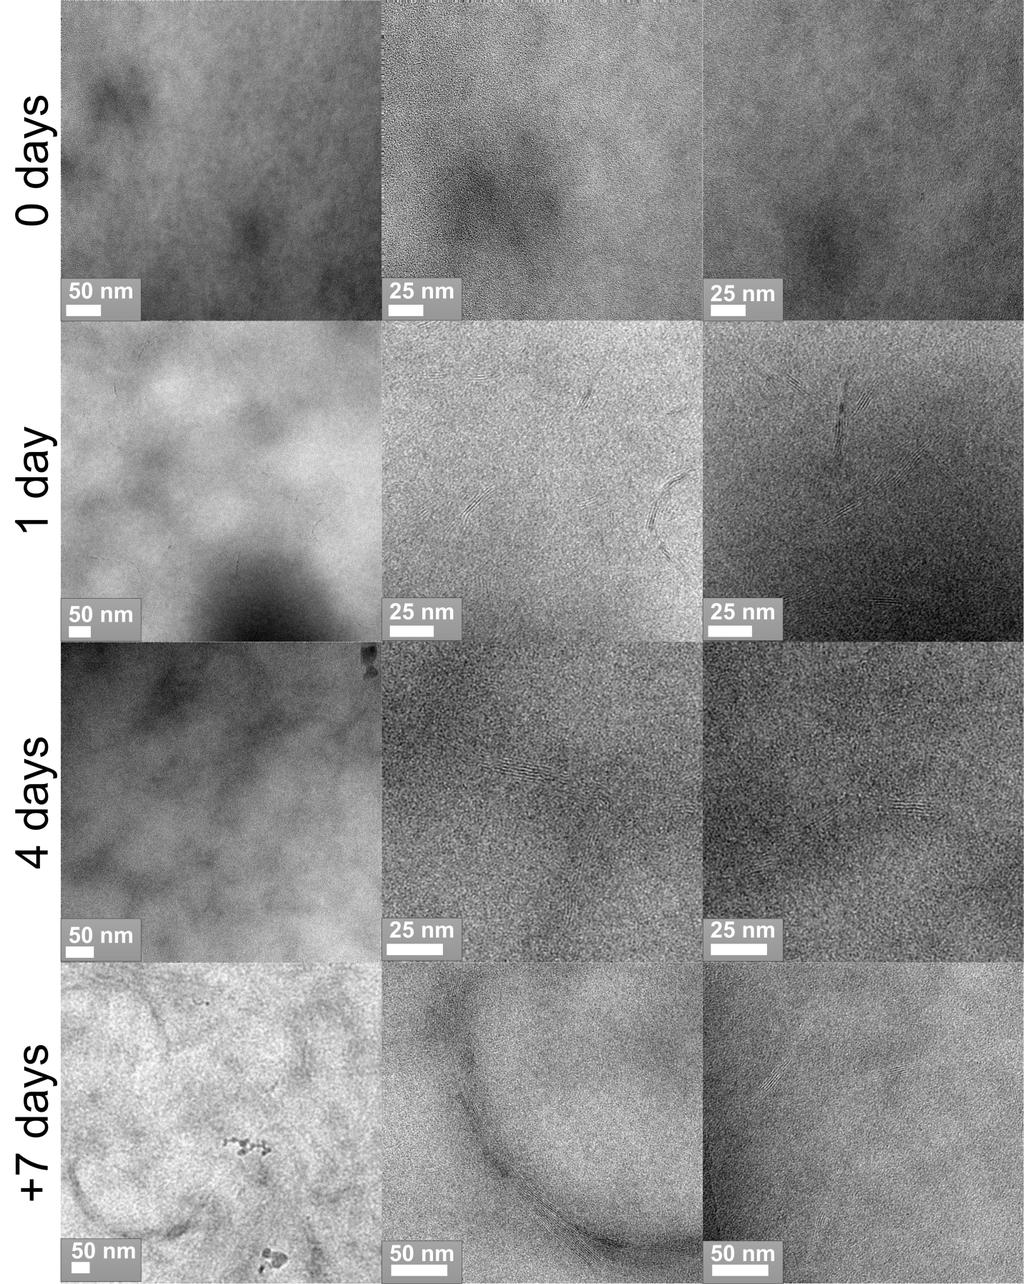 Figure S2: Cryo-TEM images showing in detail the growth of P3HT nanowires in a 1 mass % P3HT:PCBM 1:1 blend in toluene.